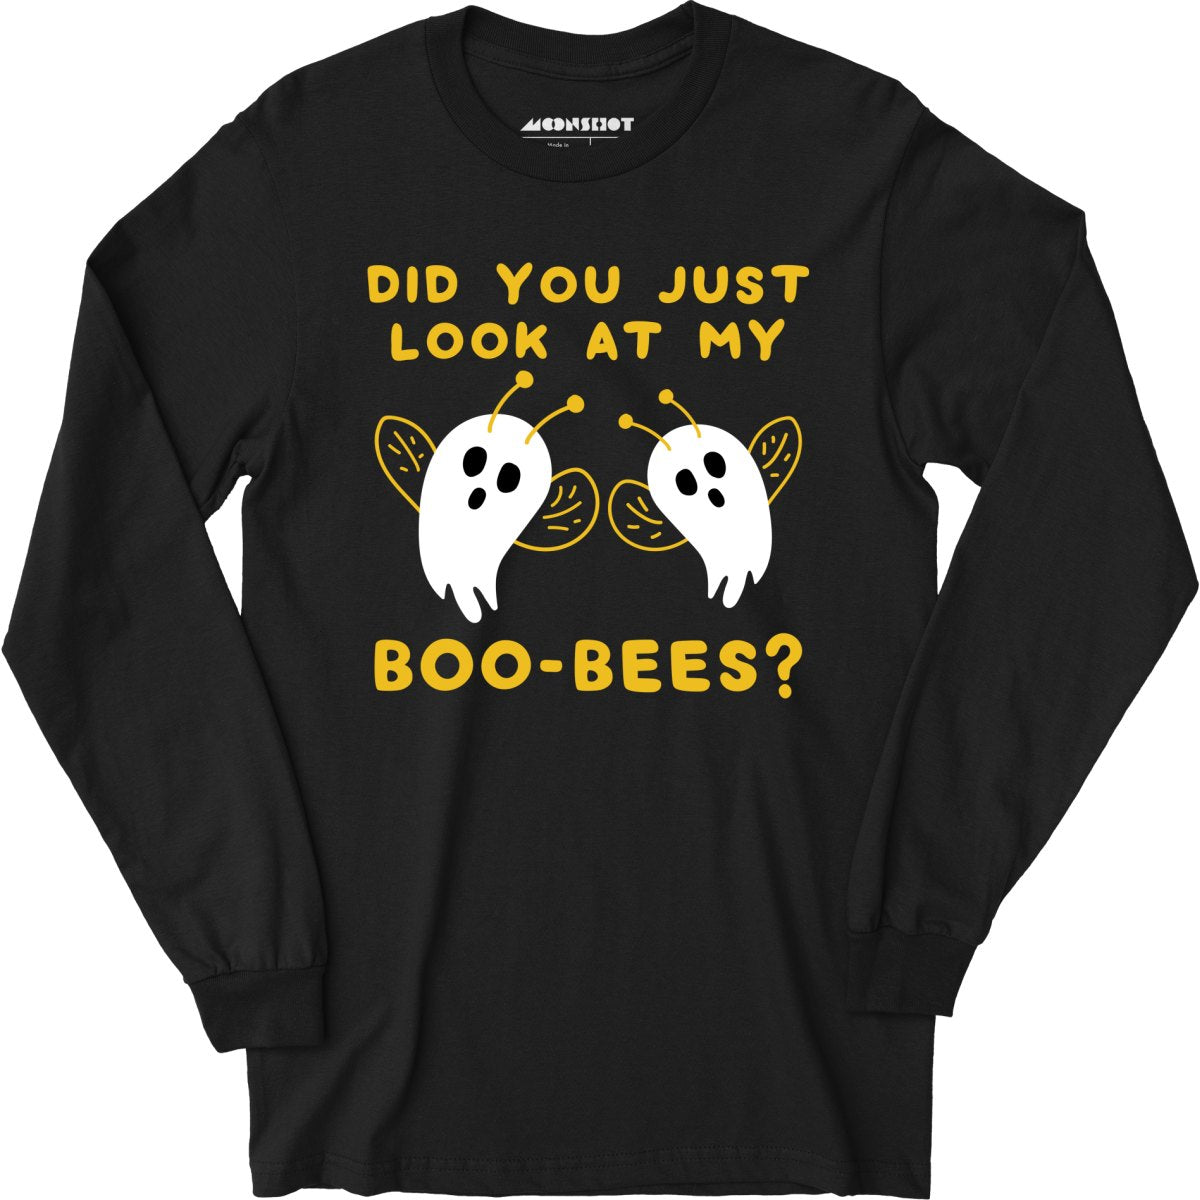 Did You Just Look At My Boo-Bees? - Long Sleeve T-Shirt